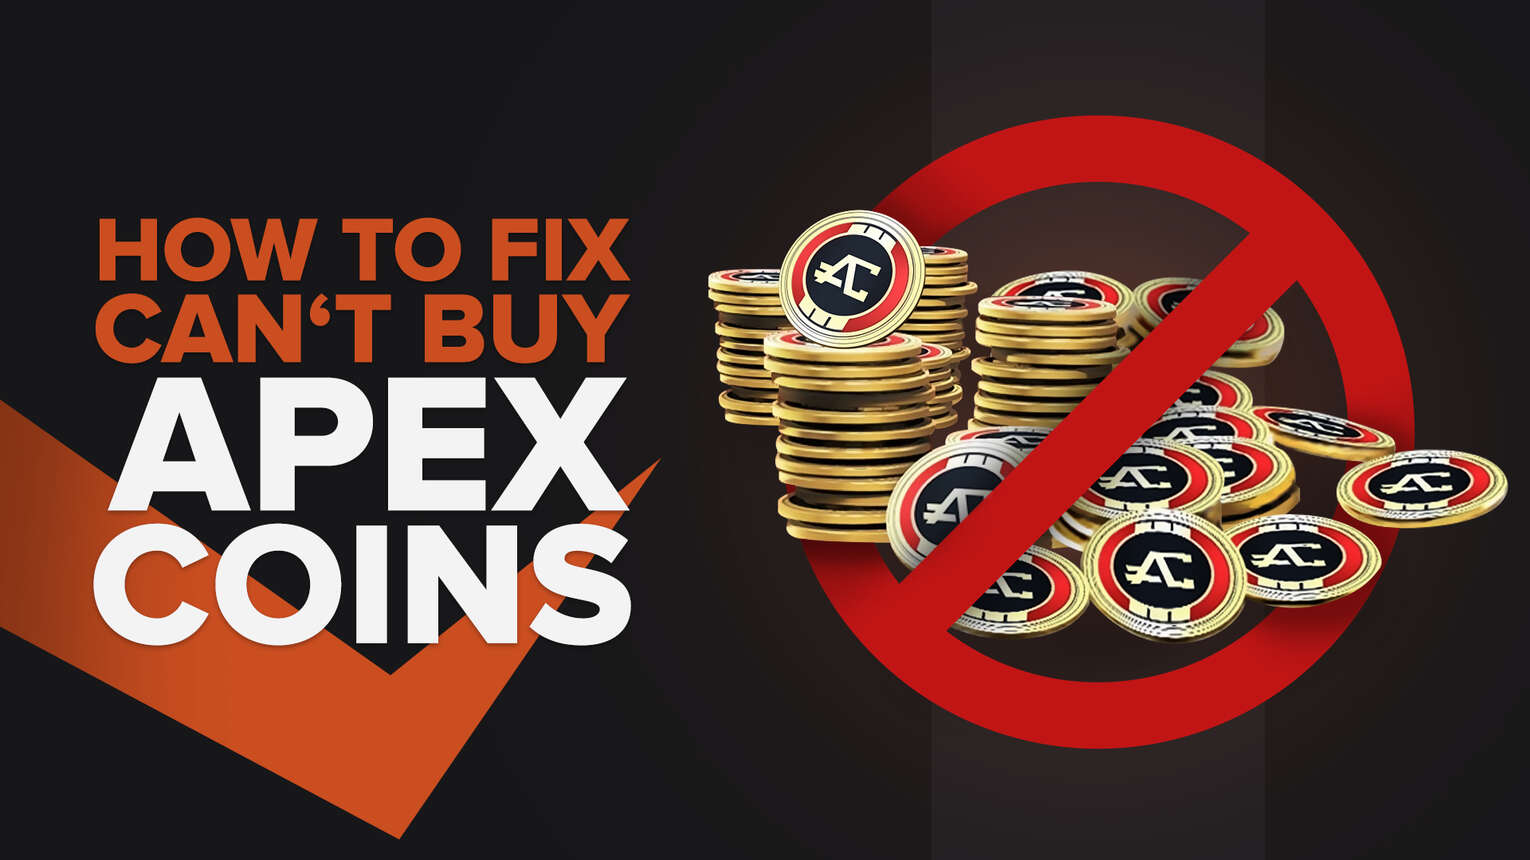 [Solved] Why can't I buy Apex coins in Apex Legends? How to fix!